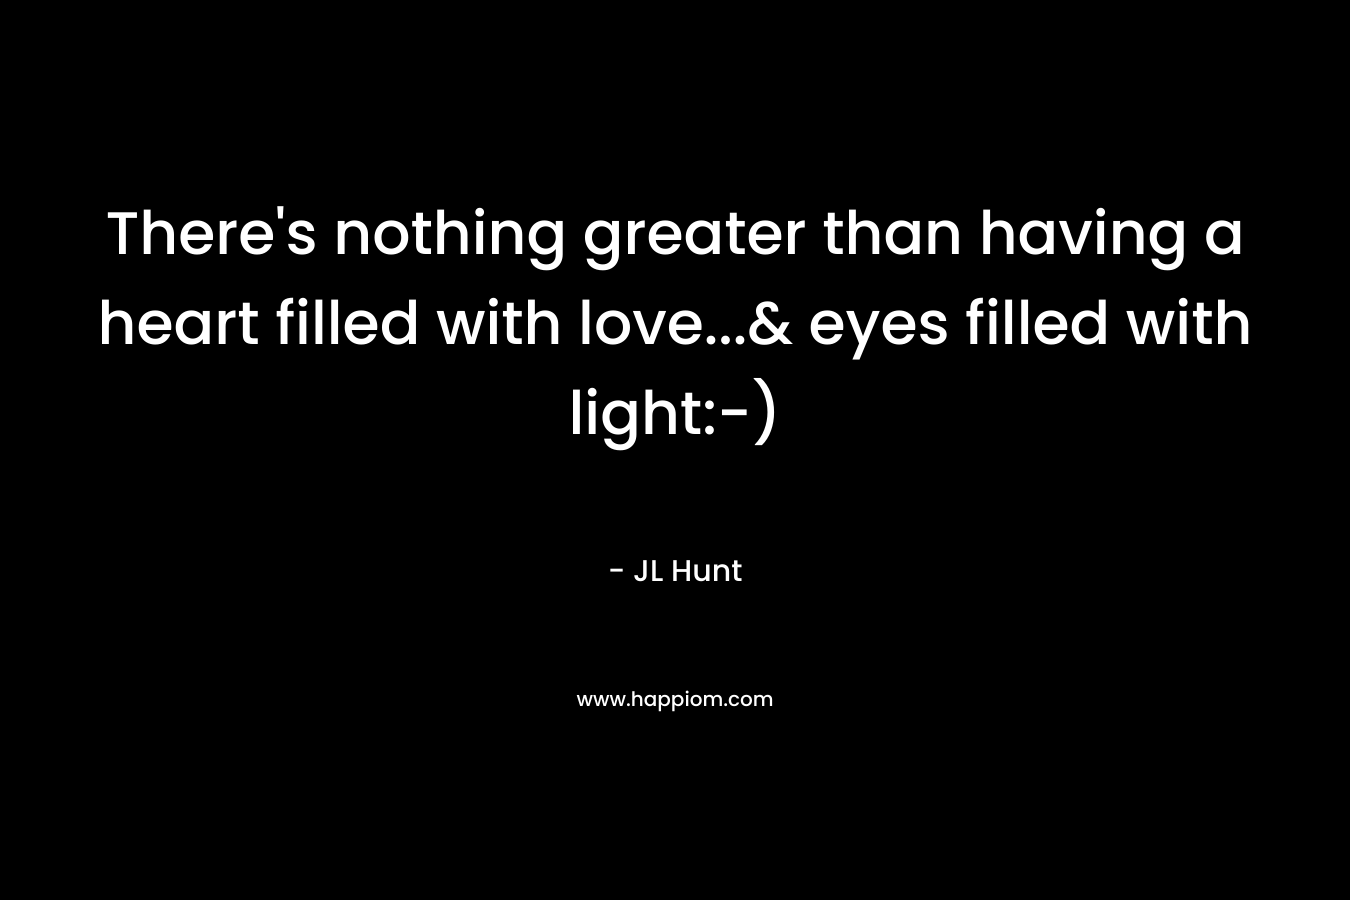 There's nothing greater than having a heart filled with love...& eyes filled with light:-)